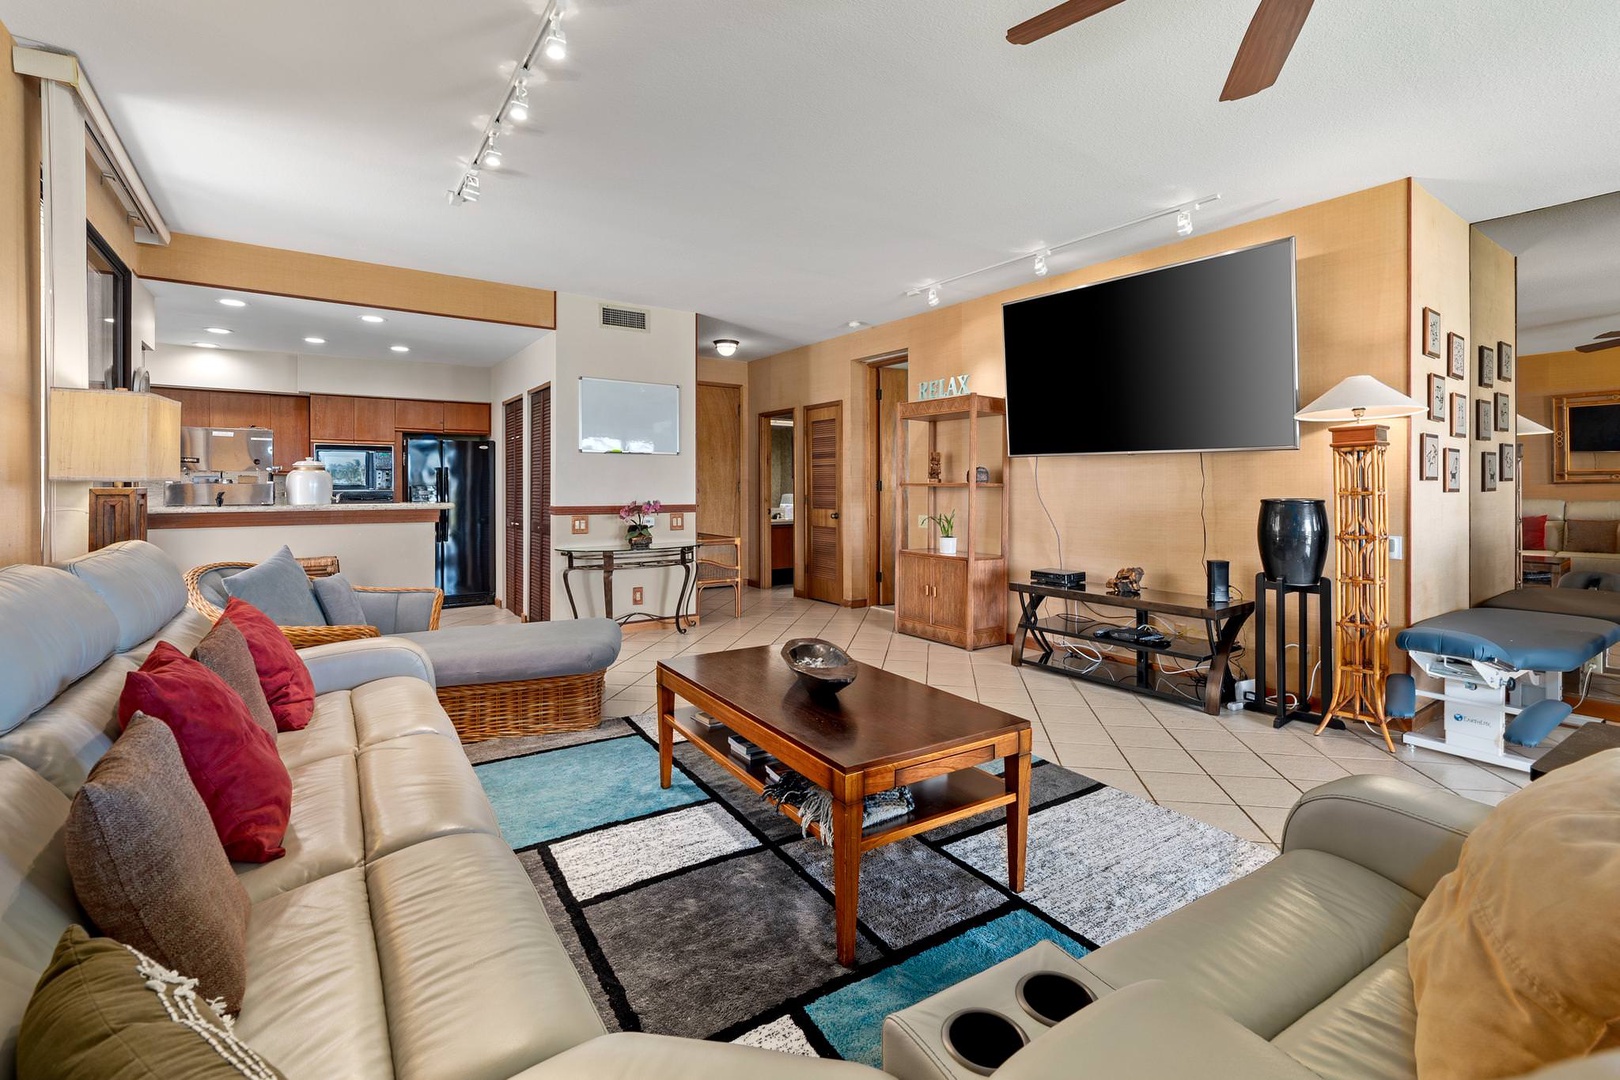 Living room with 86" flat-screen TV and comfortable seating